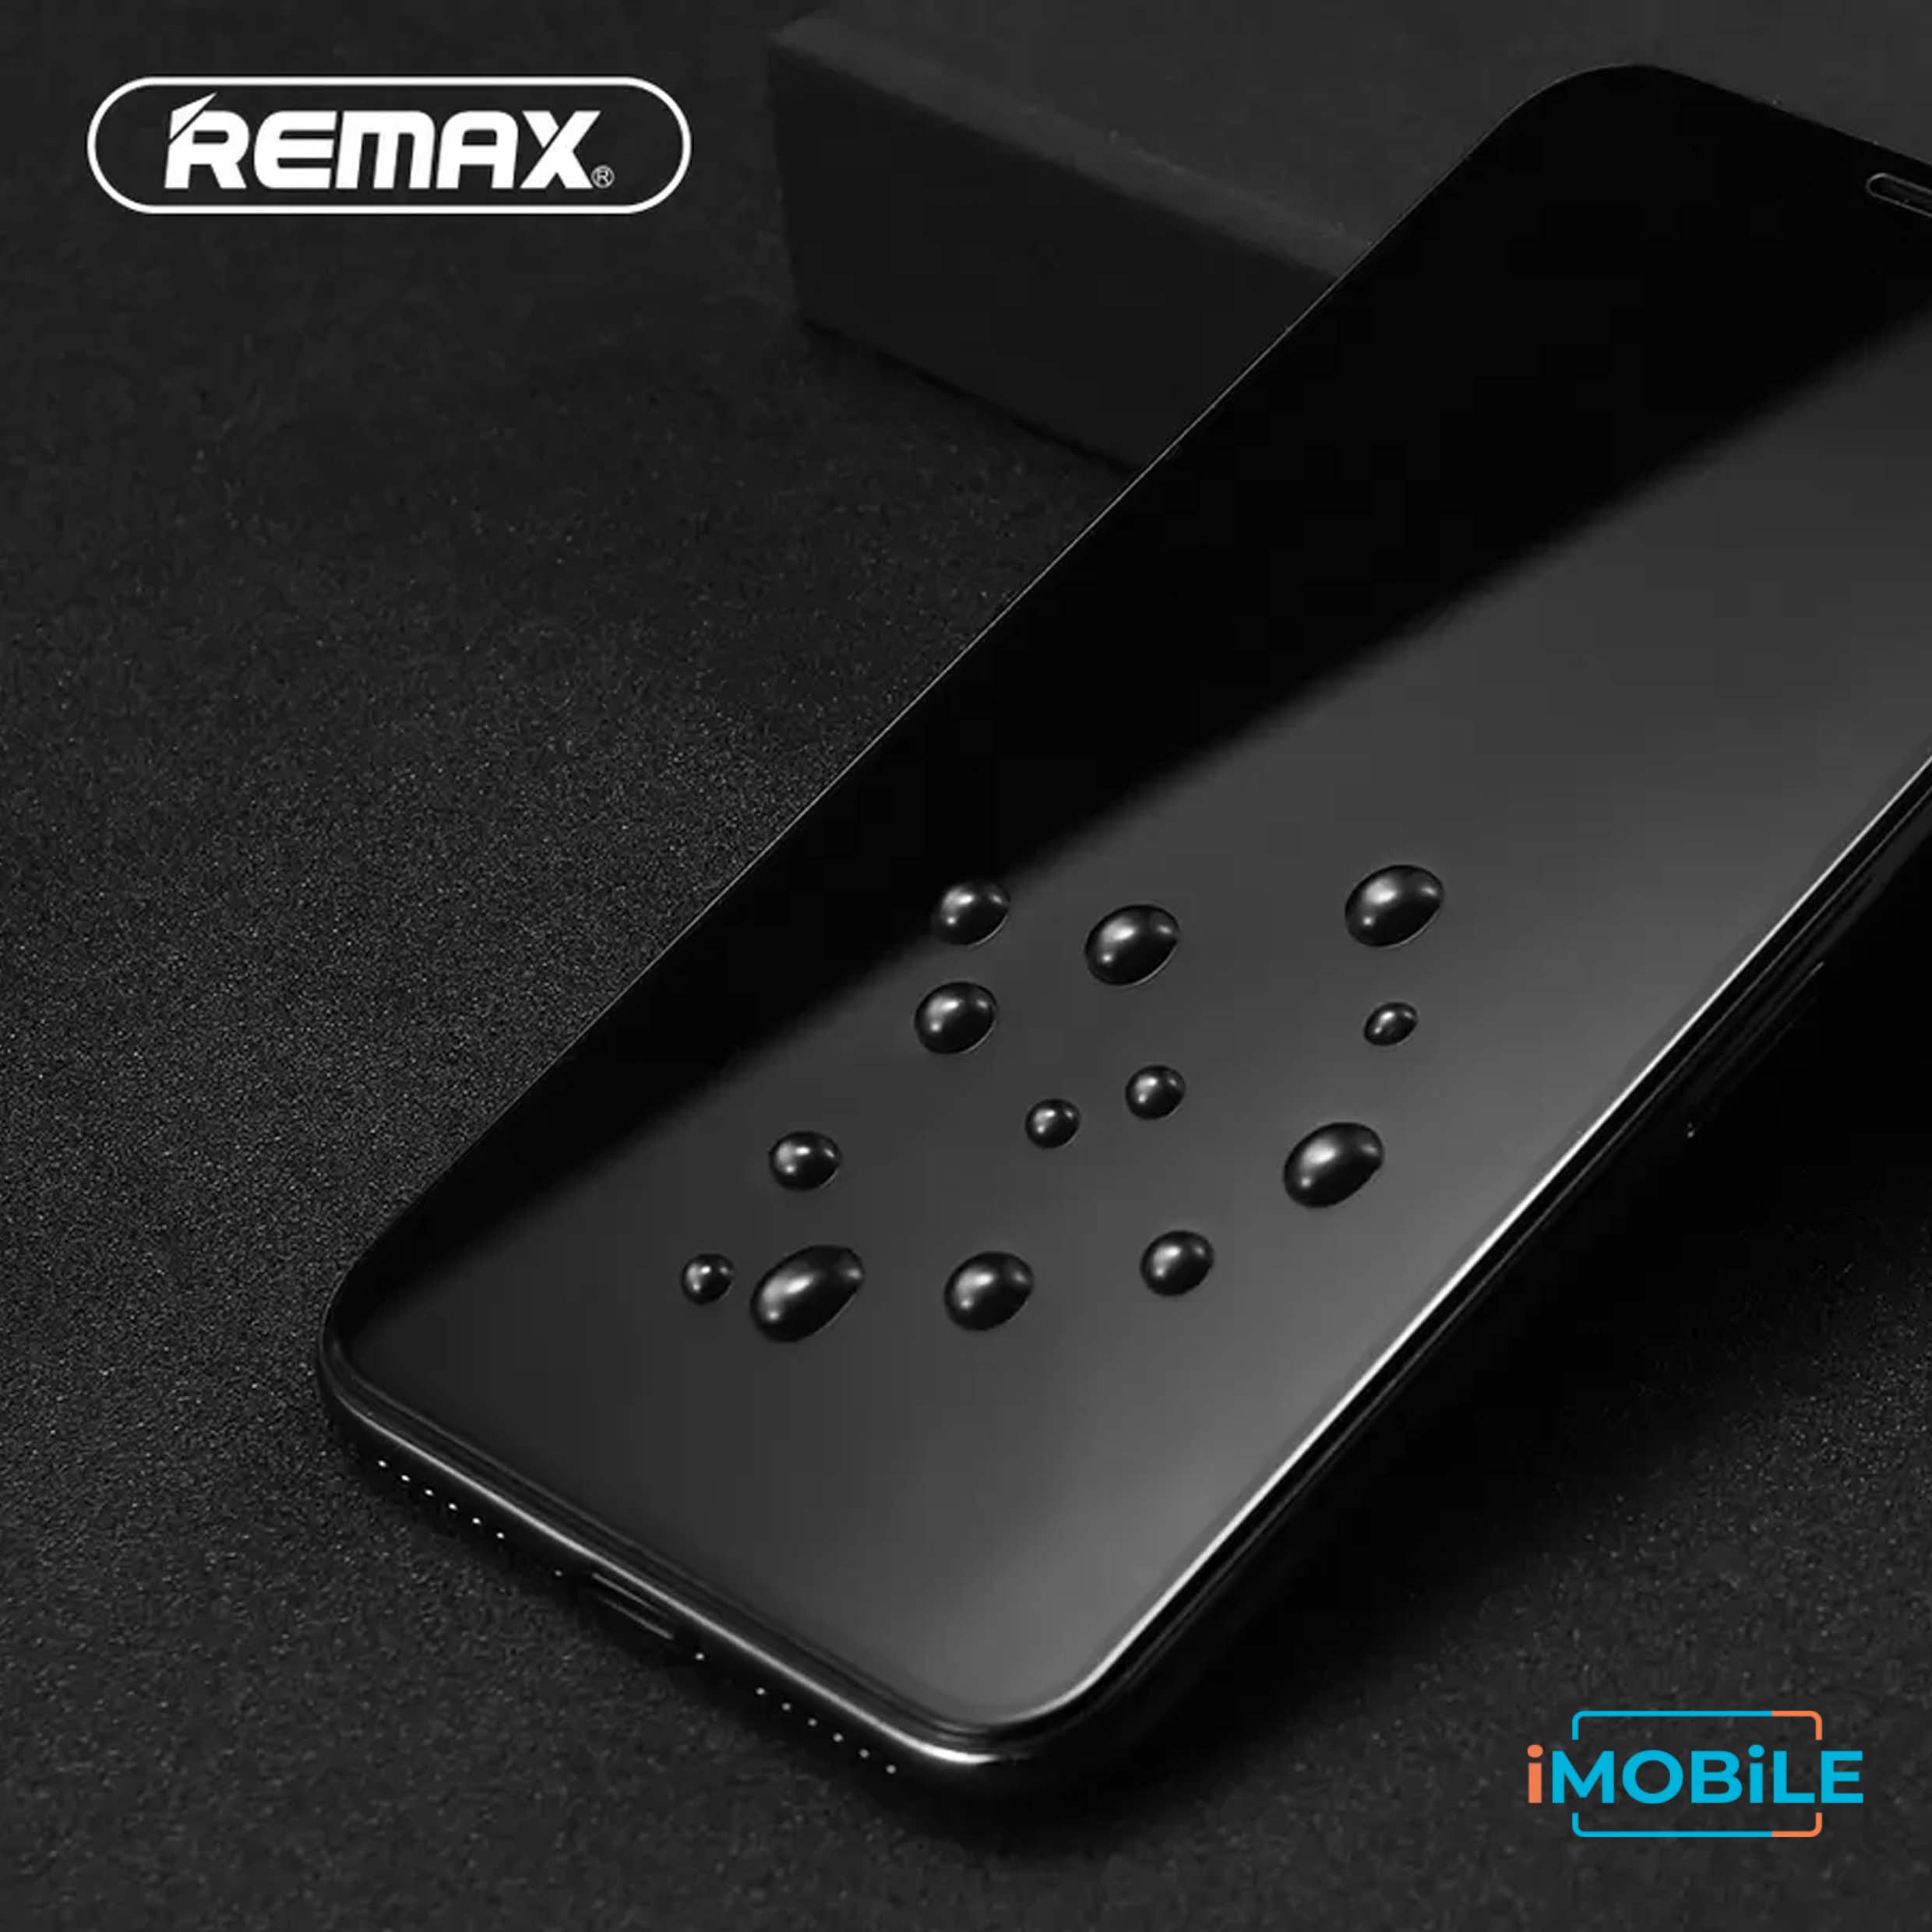 Remax 2.5D Tempered Glass with Envelope Pack, iPhone 13 Mini